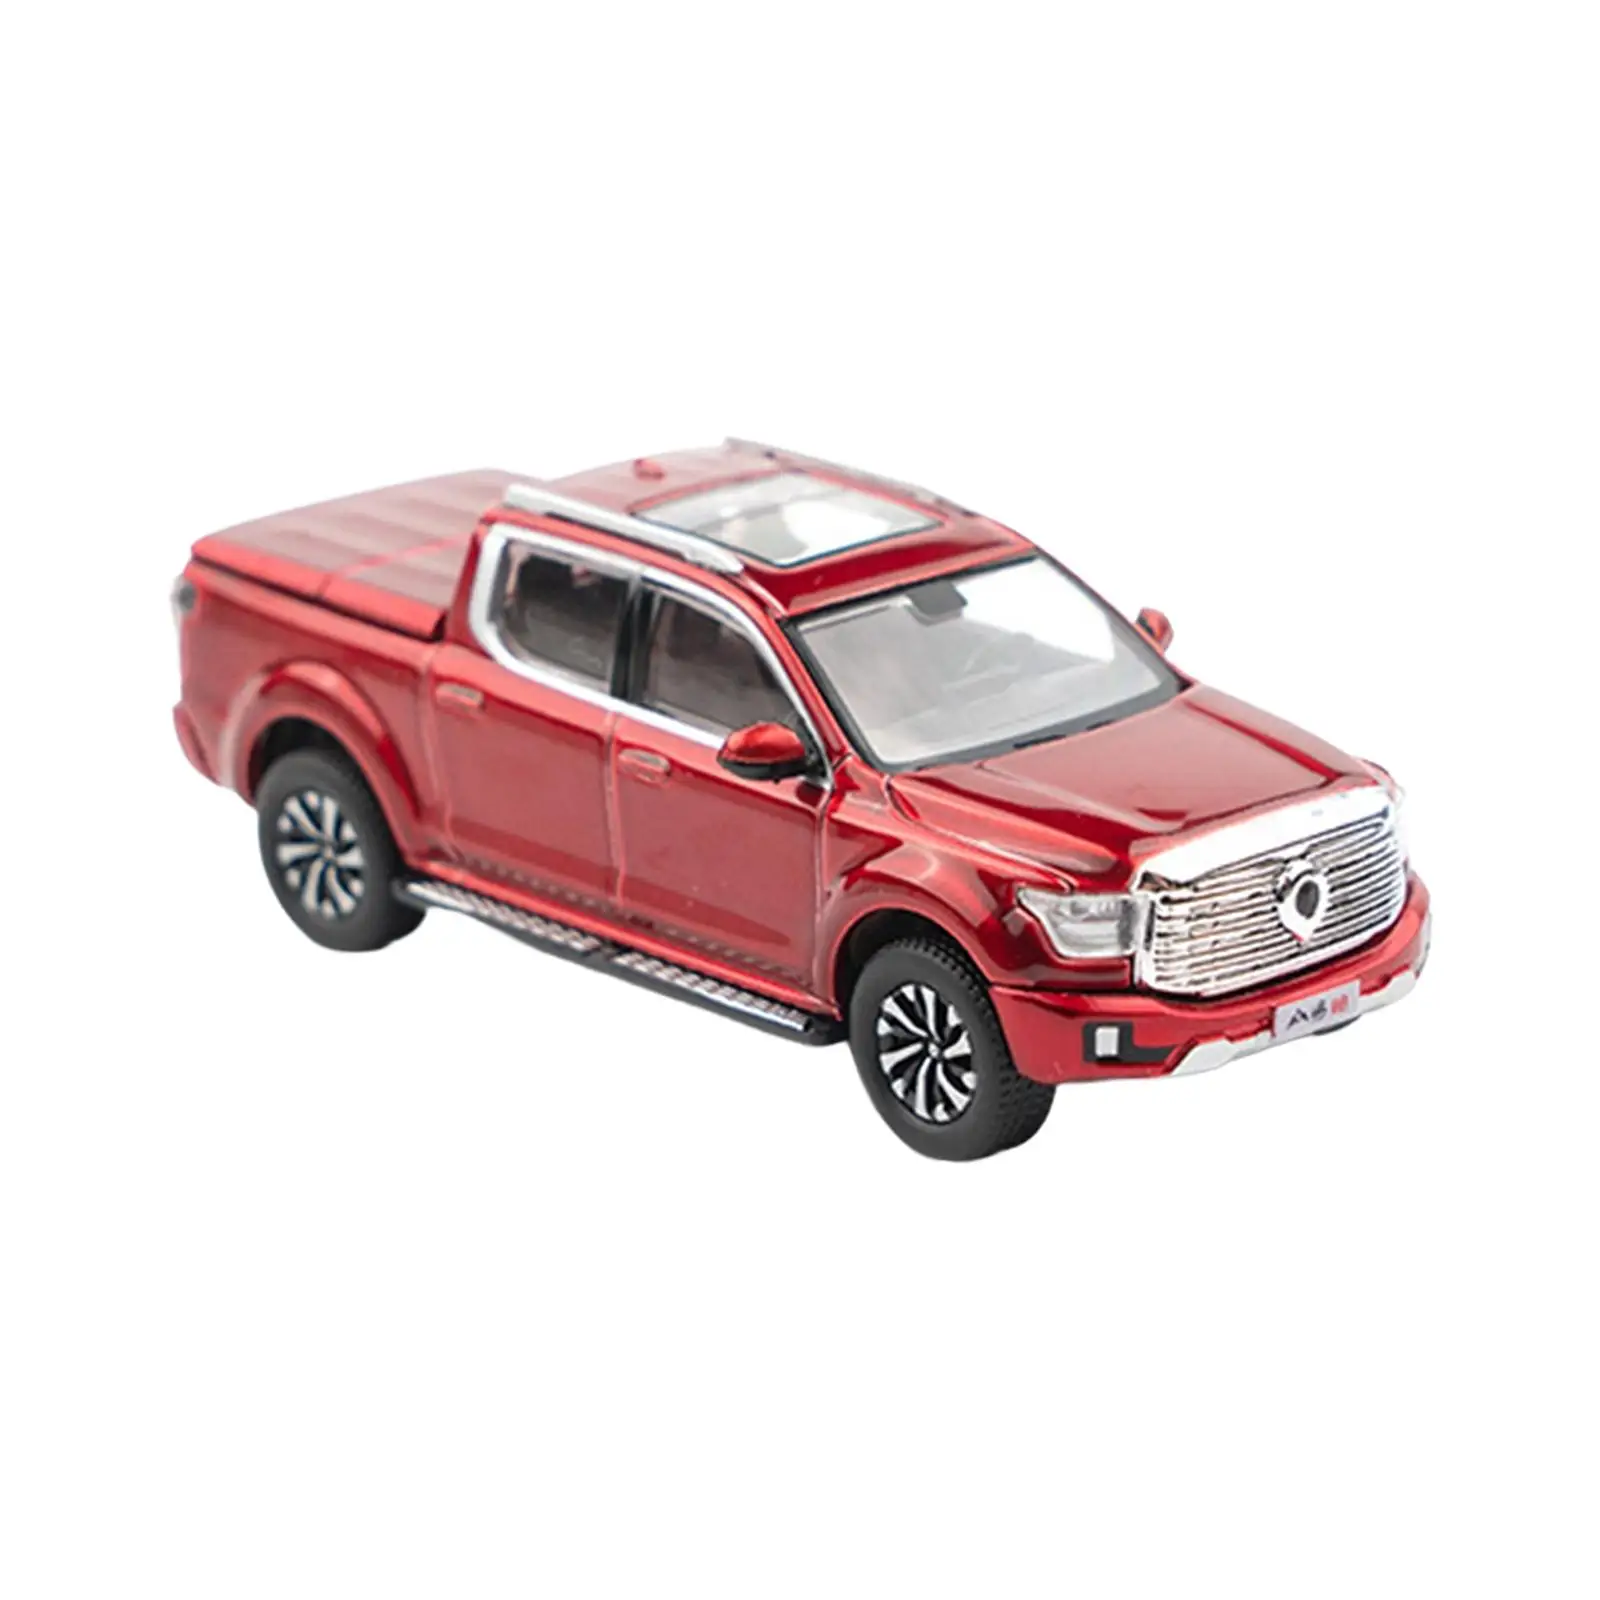 

1/64 Diecast Vehicle Vehicles Toy Alloy Casting Model Car Collectible Diecast Vehicles for Great Wall Danxiahong Vehicle